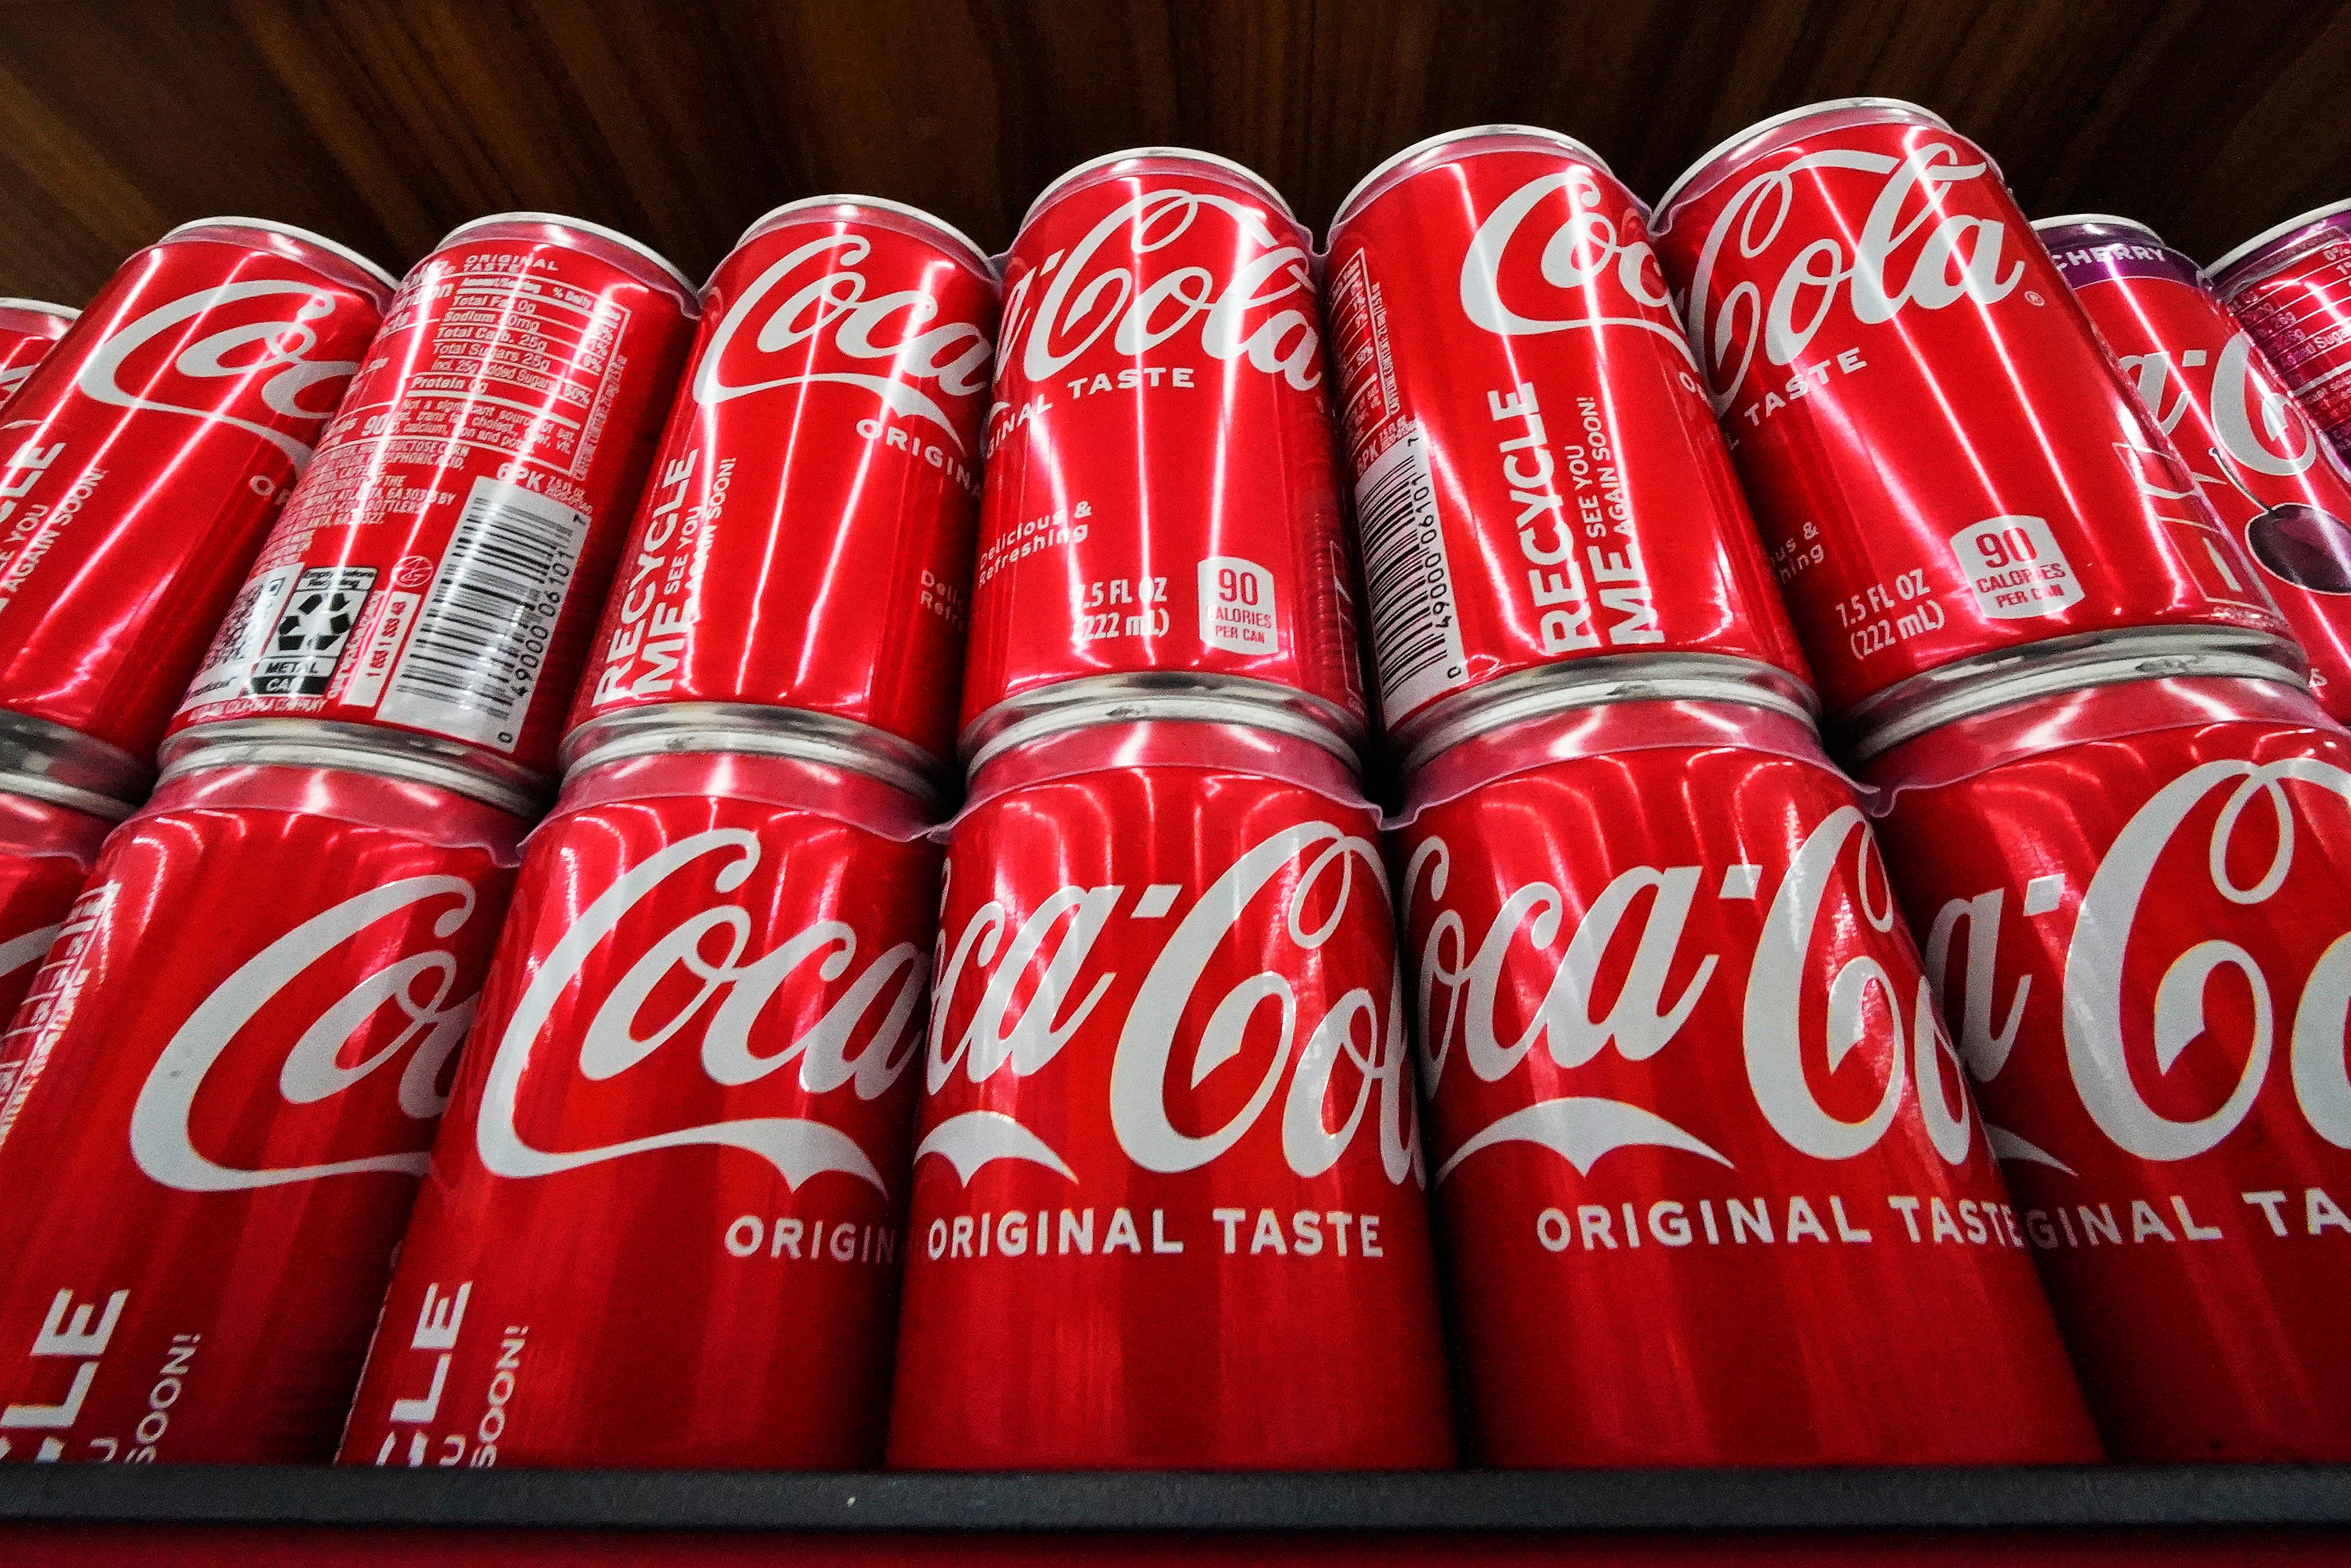 When Cop27 announced its decision to partner with Coca-Cola in September 2022, activists slammed the move, pointing out the American beverage company’s record as a top plastic polluter. However, the Egyptian presidency ignored the calls